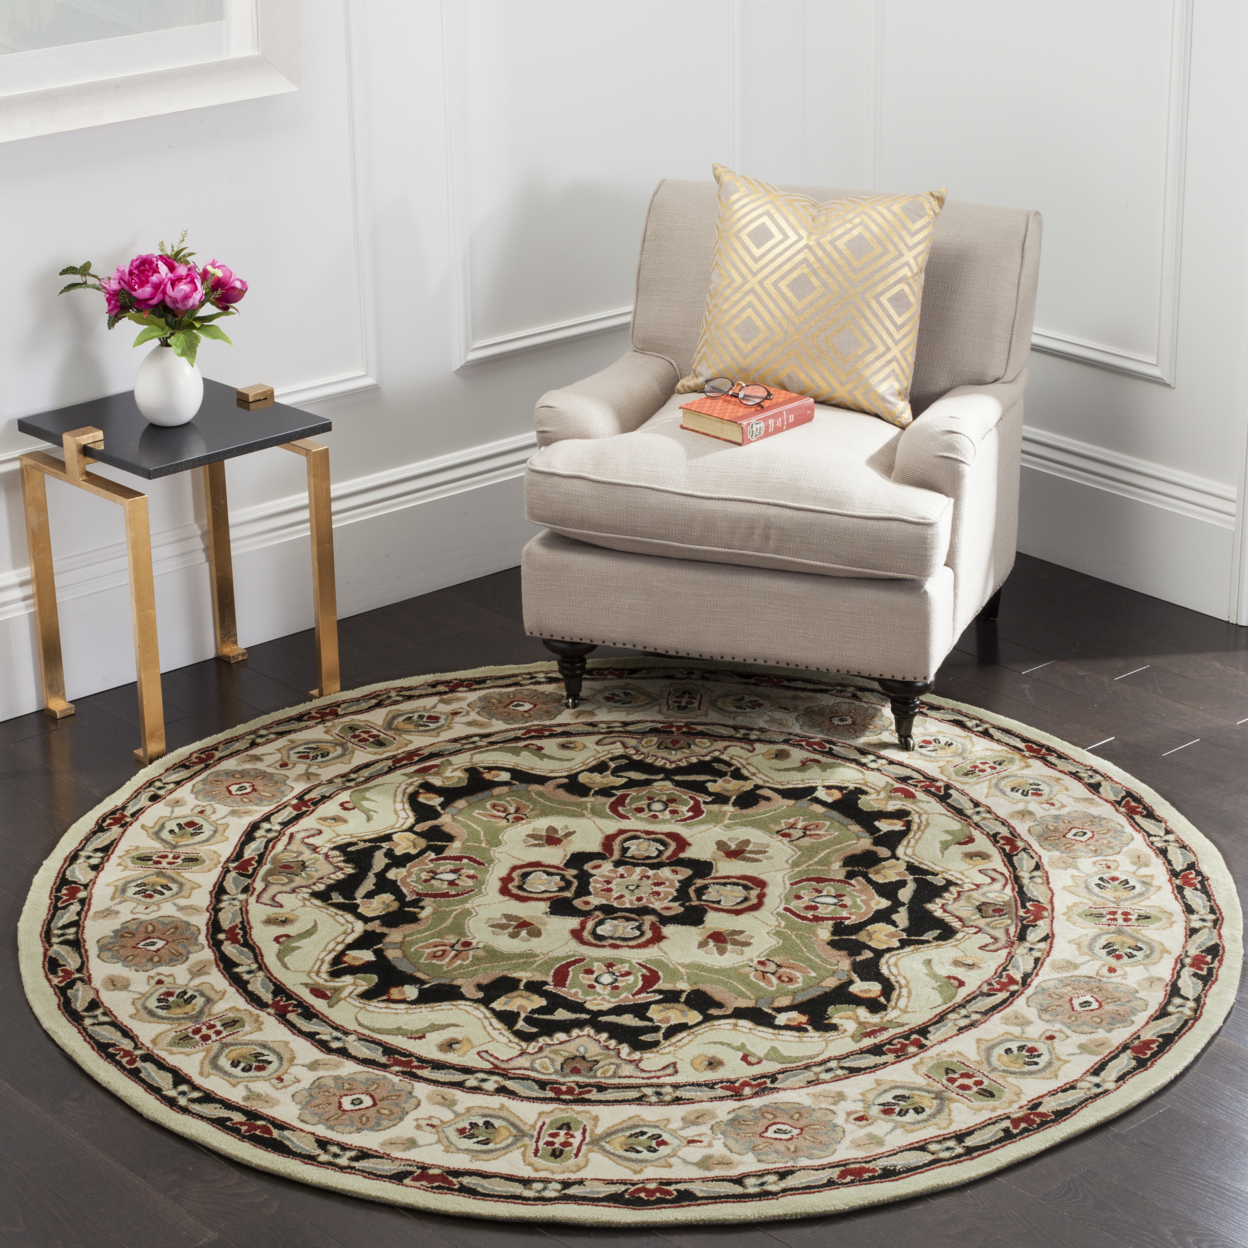 SAFAVIEH Total Performance TLP718A Soft Green / Ivory Rug - 6' Round